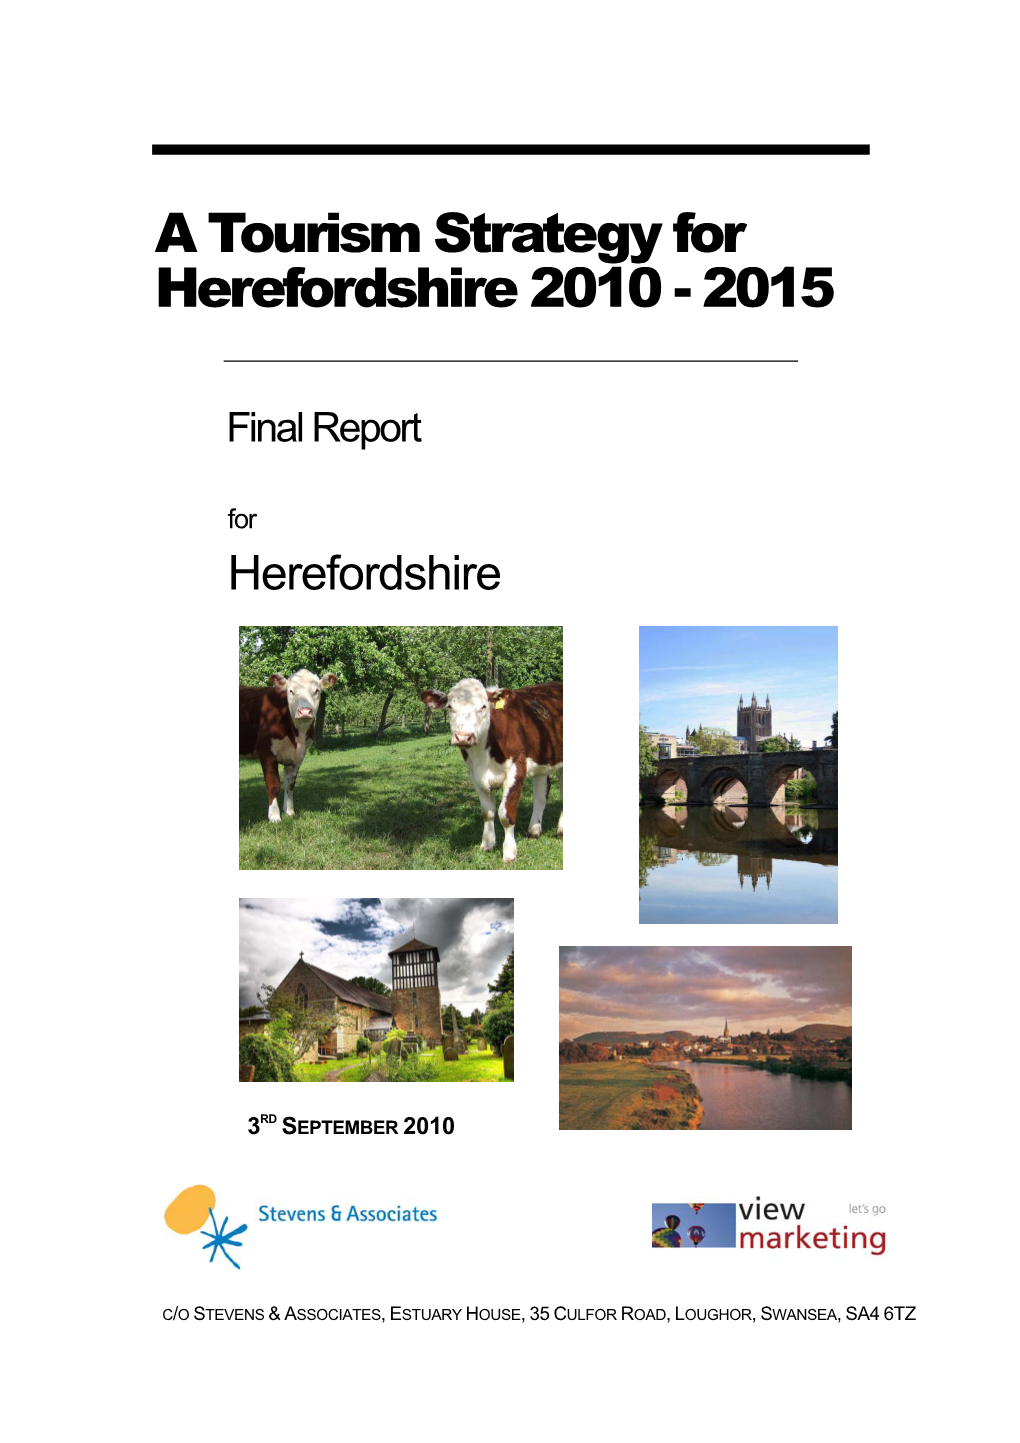 Herefordshire Tourism Strategy 2010-2015